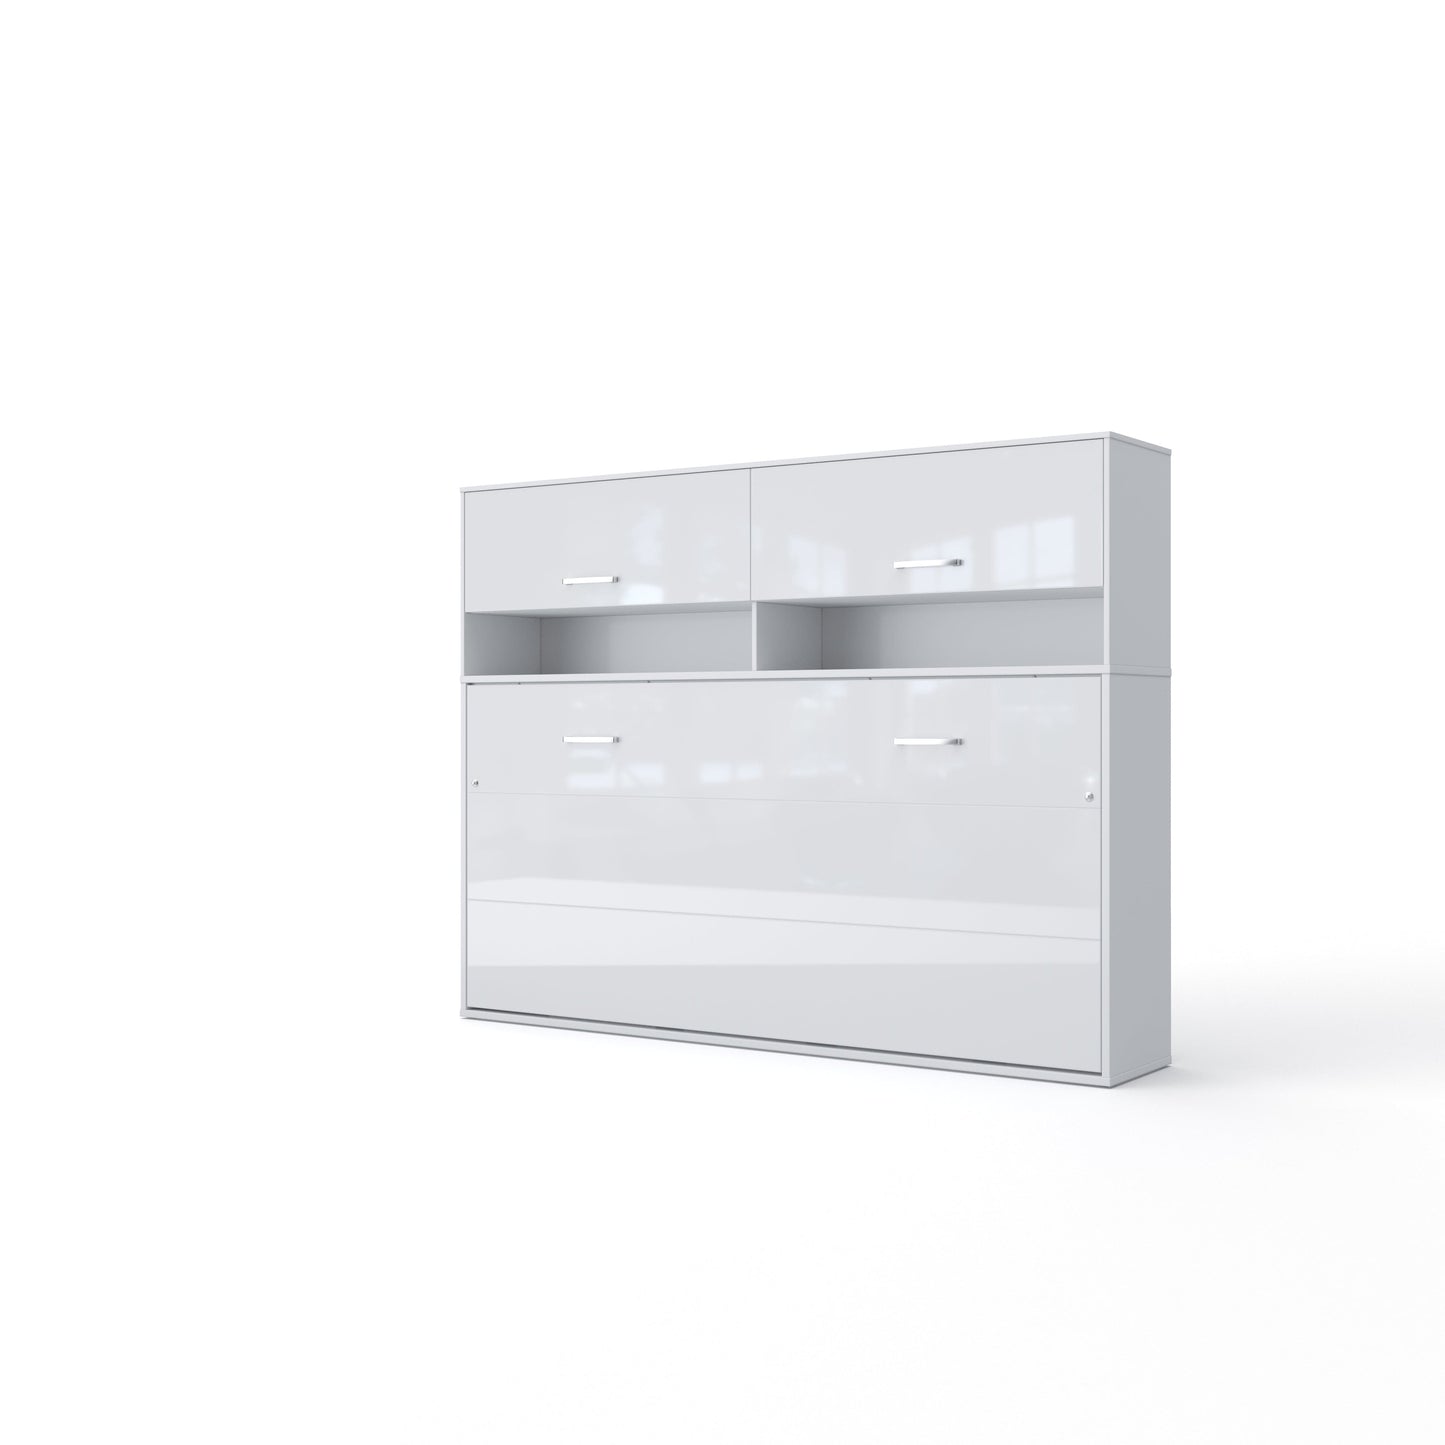 Maxima House Maxima House Invento Horizontal Wall Bed, European Full Size with a cabinet on top White/White IN120H-11W